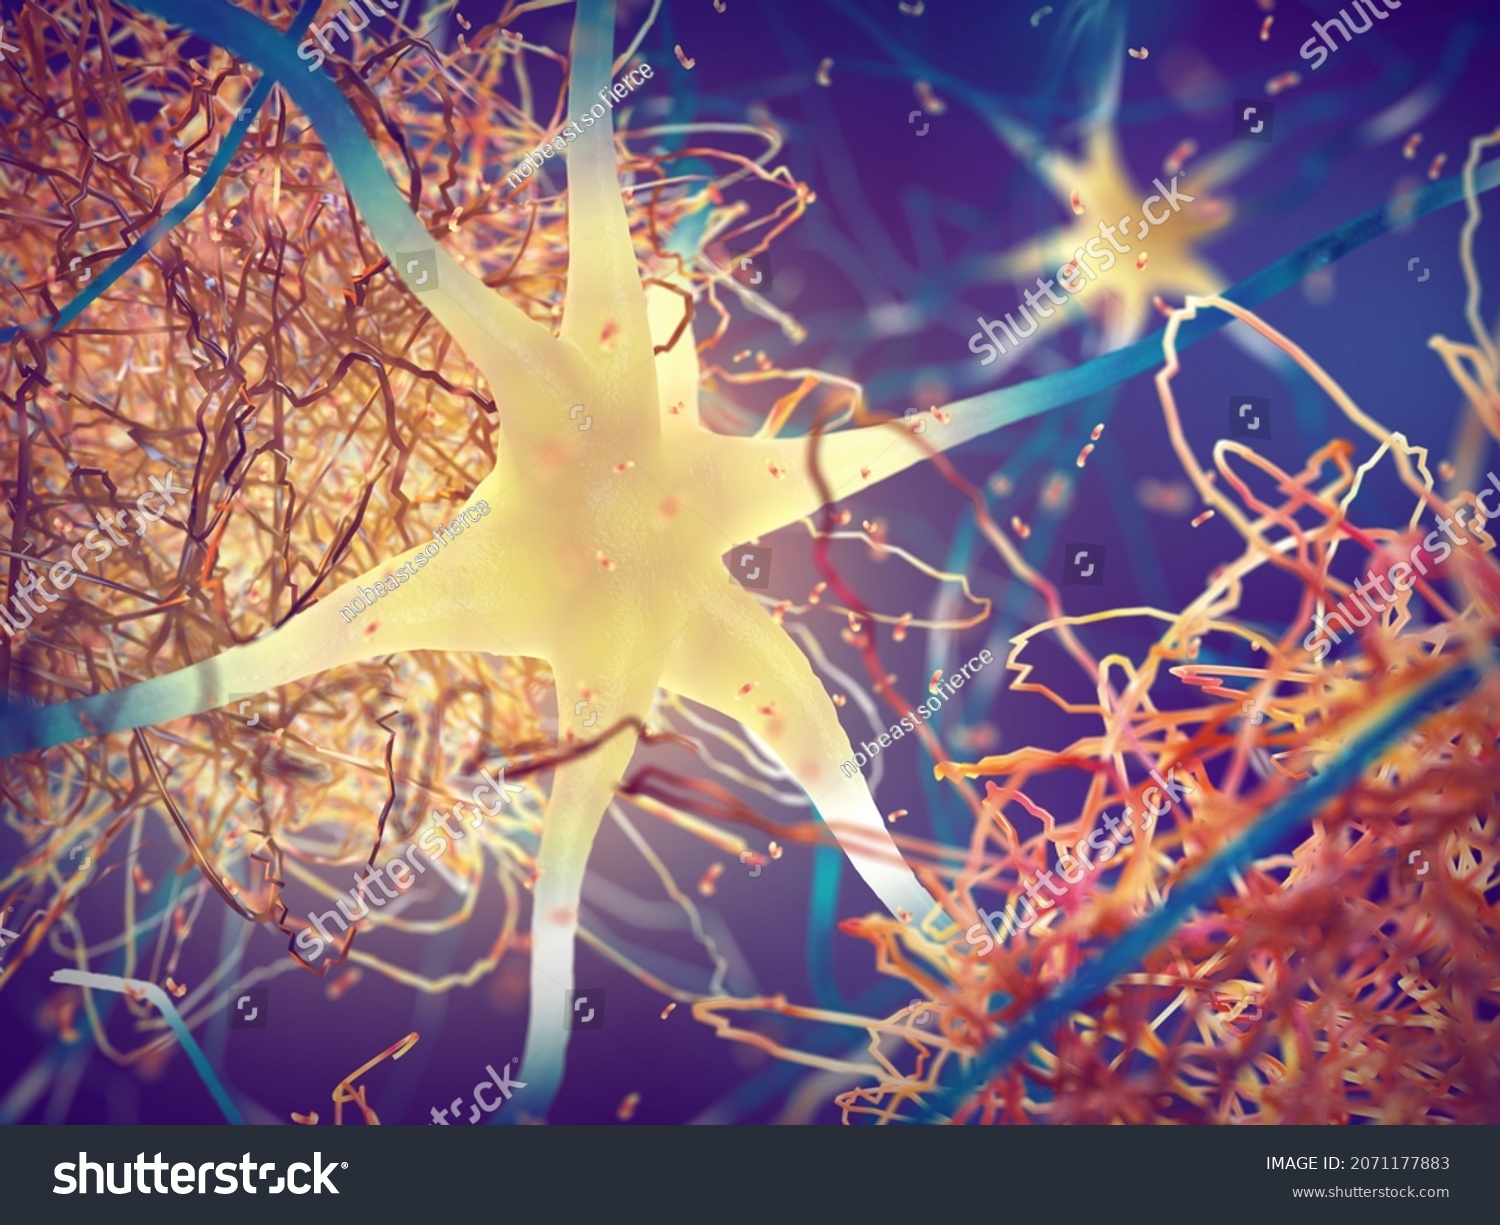 Amyloid Plaques Forming Between Neurons 3d Stock Illustration 2071177883 Shutterstock 